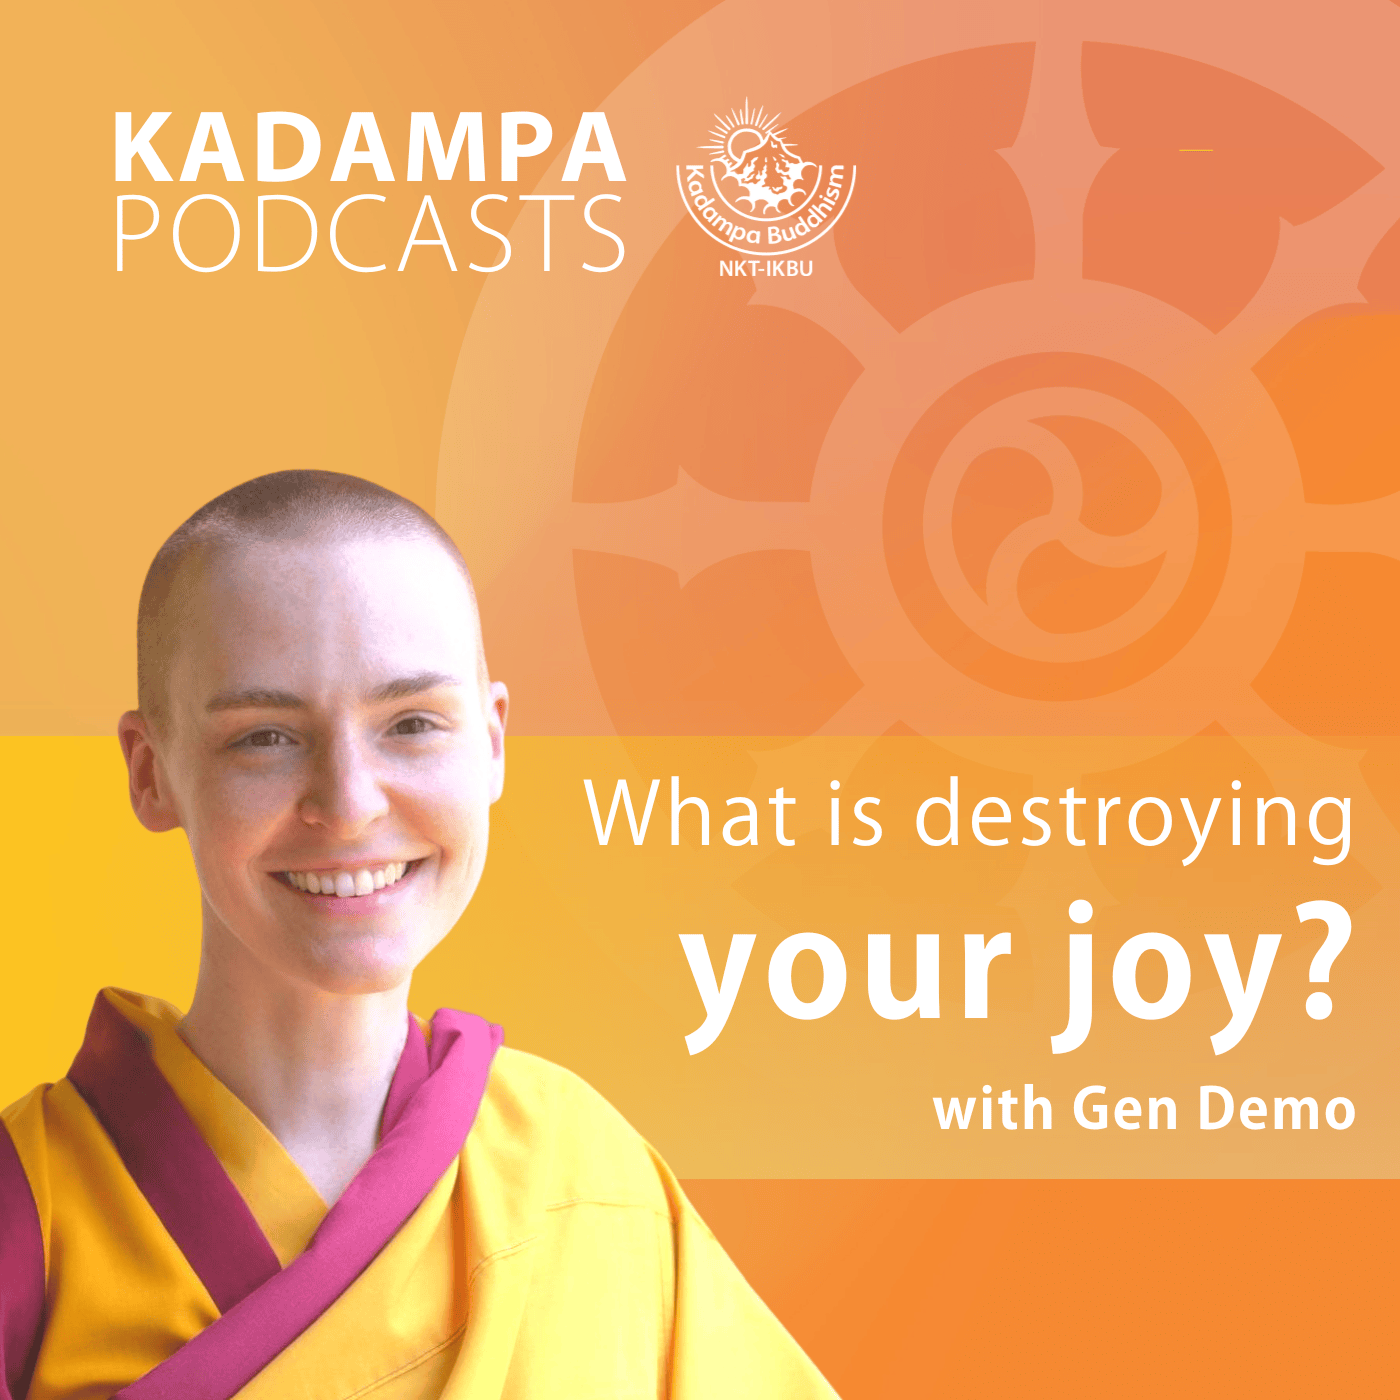 What is destroying your joy?